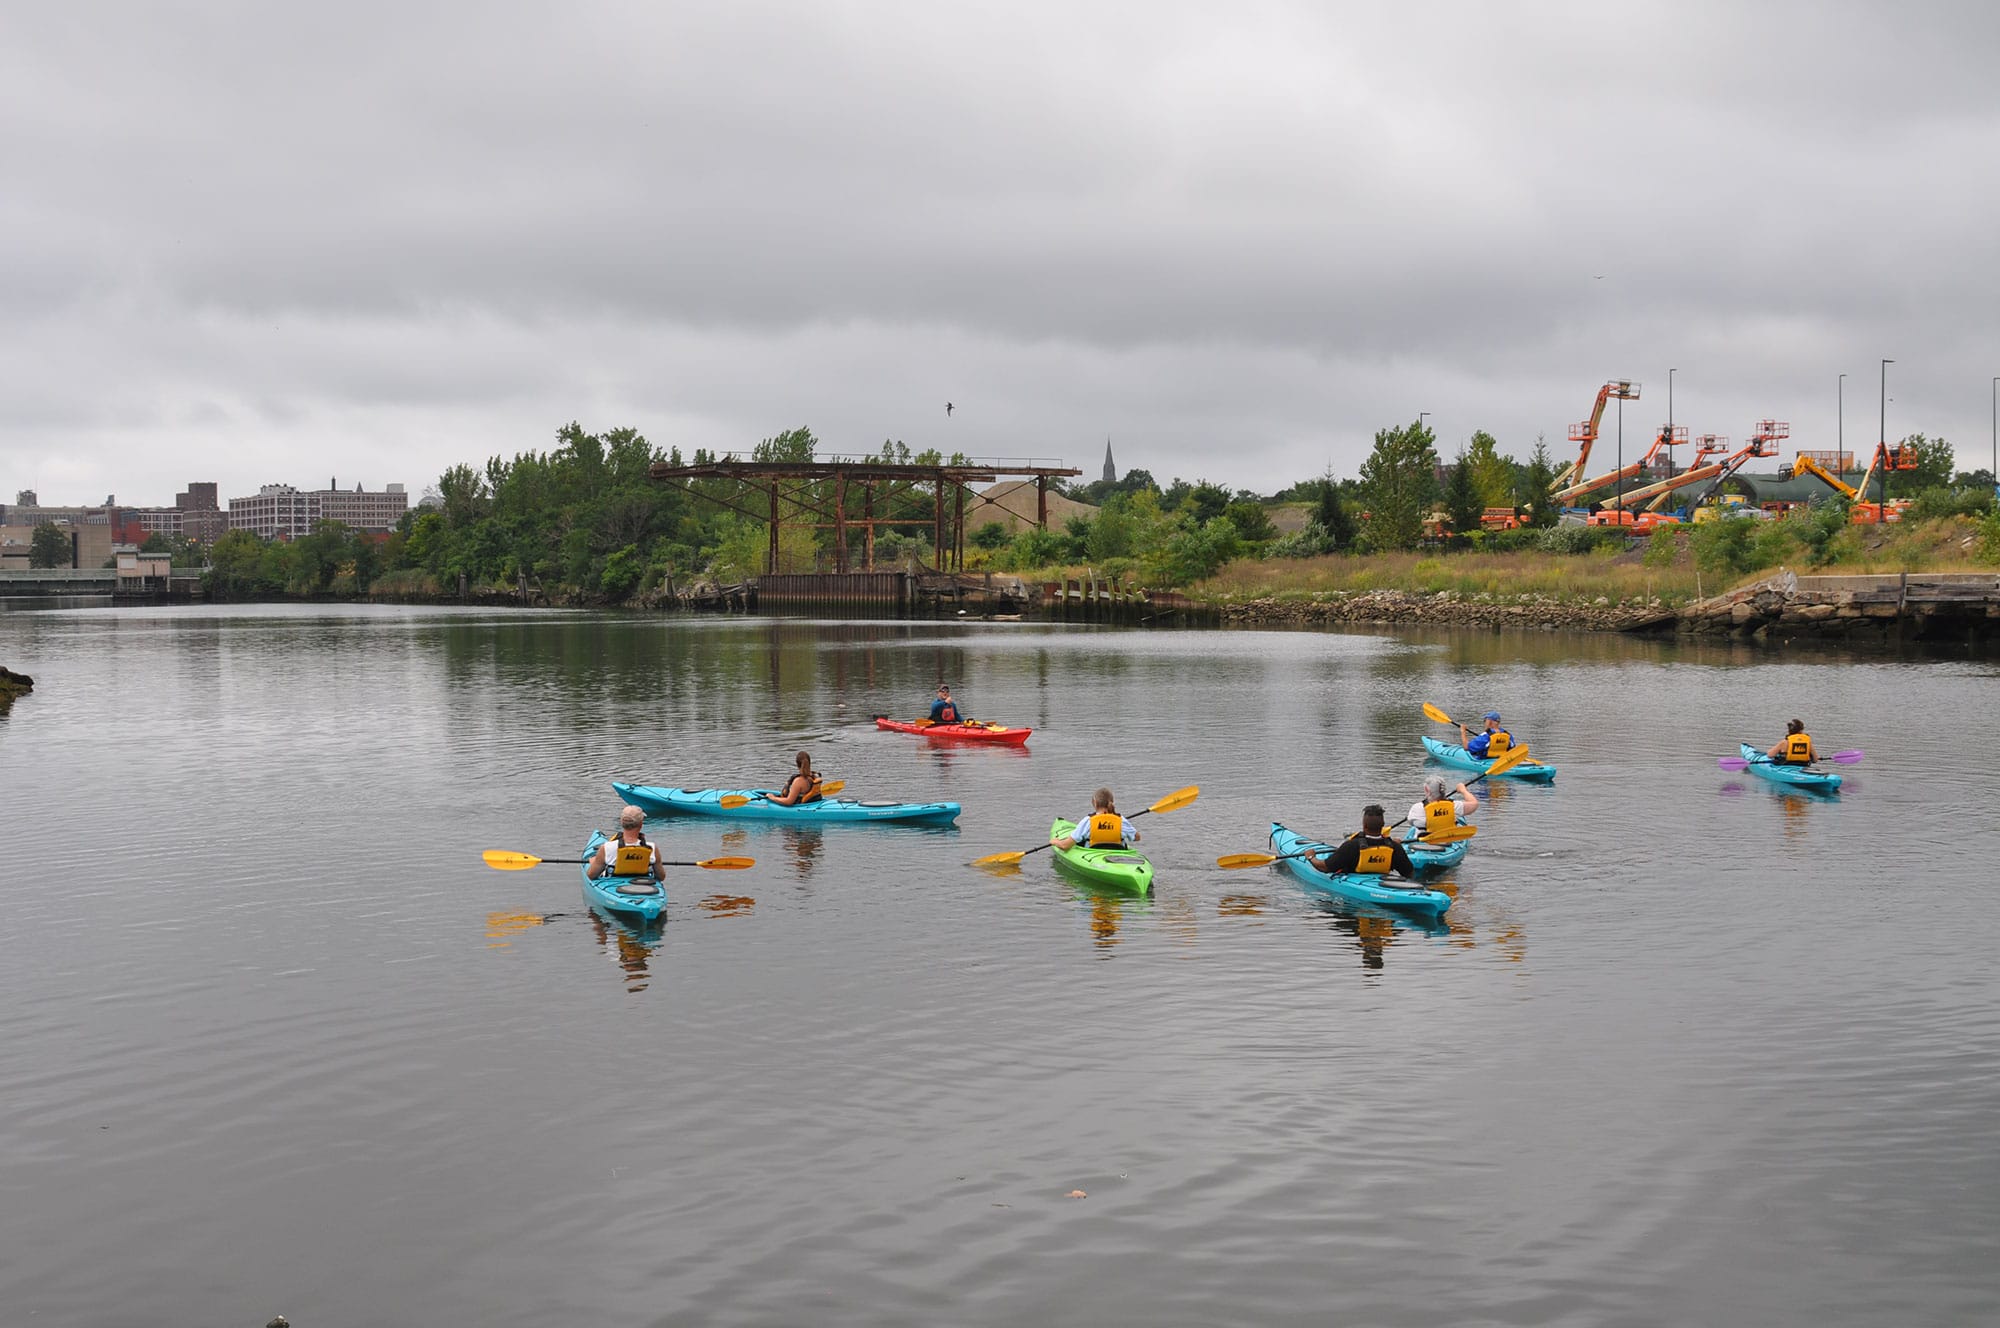 A group of people in kayaks on a body of water.